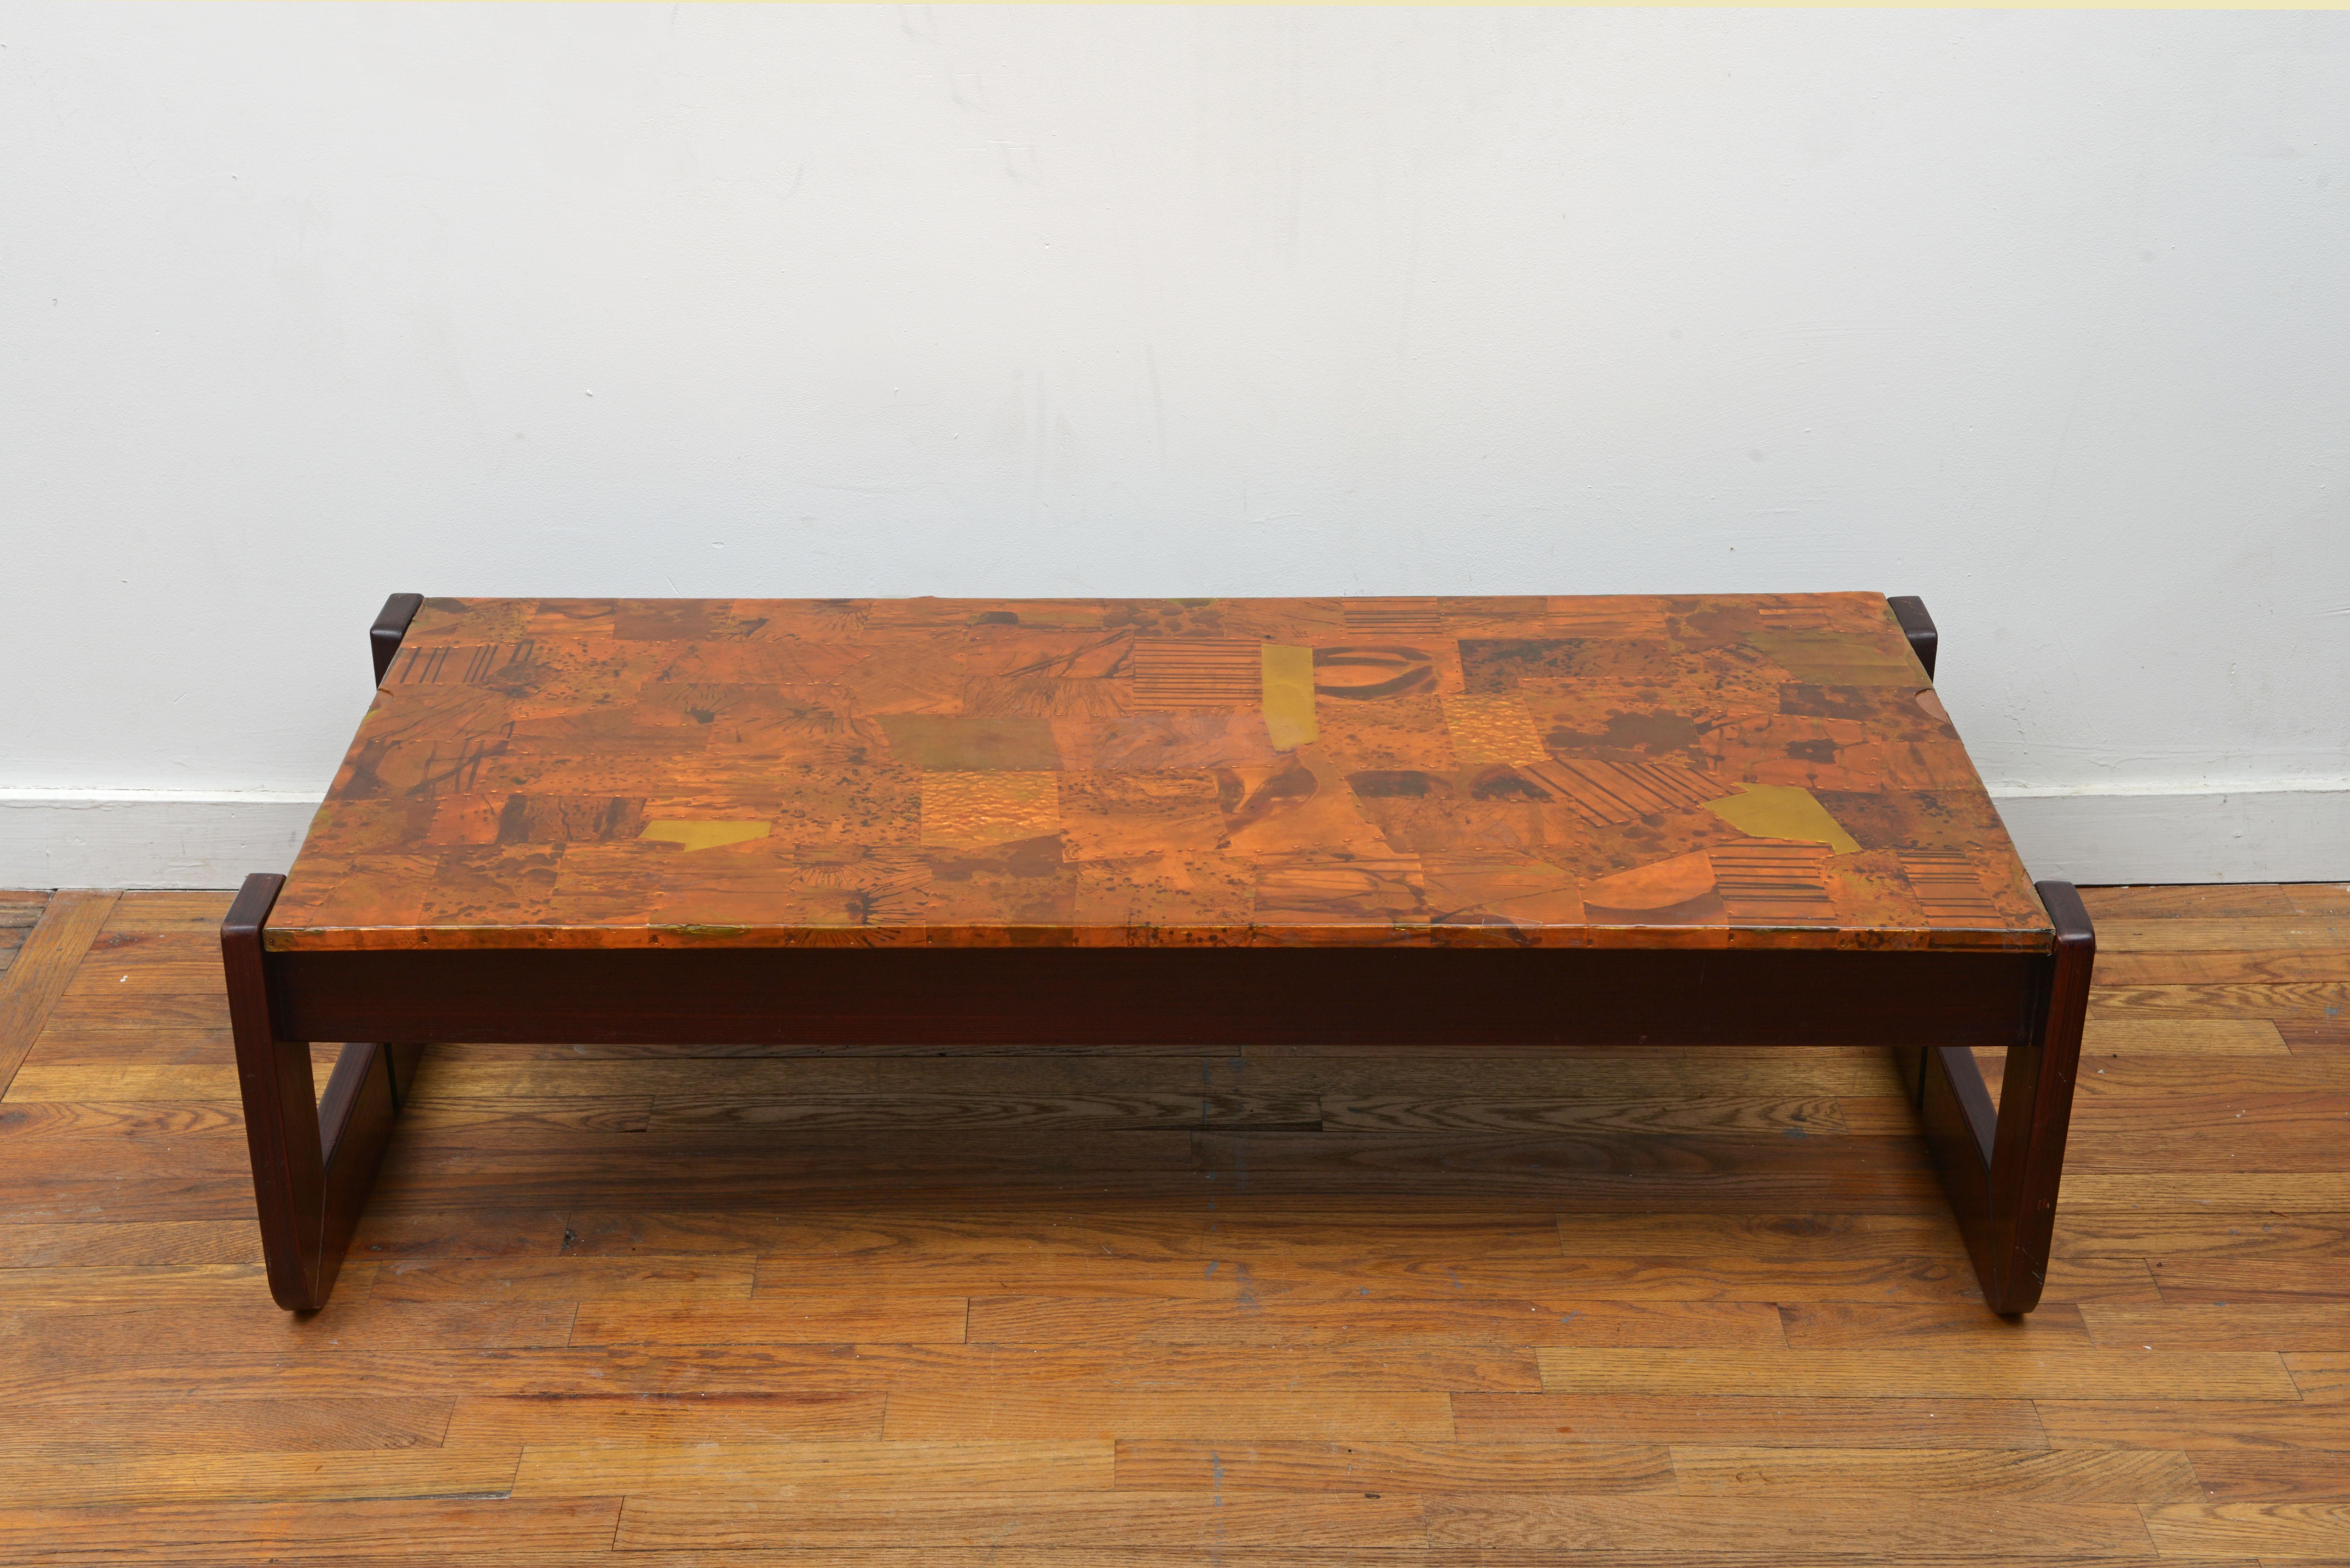 One incredible Percival Lafer copper Patchwork with solid rosewood frame coffee tables 1970s. This Brazilian modern beauty features a removable top and hardware on all corners to tighten up the frame.